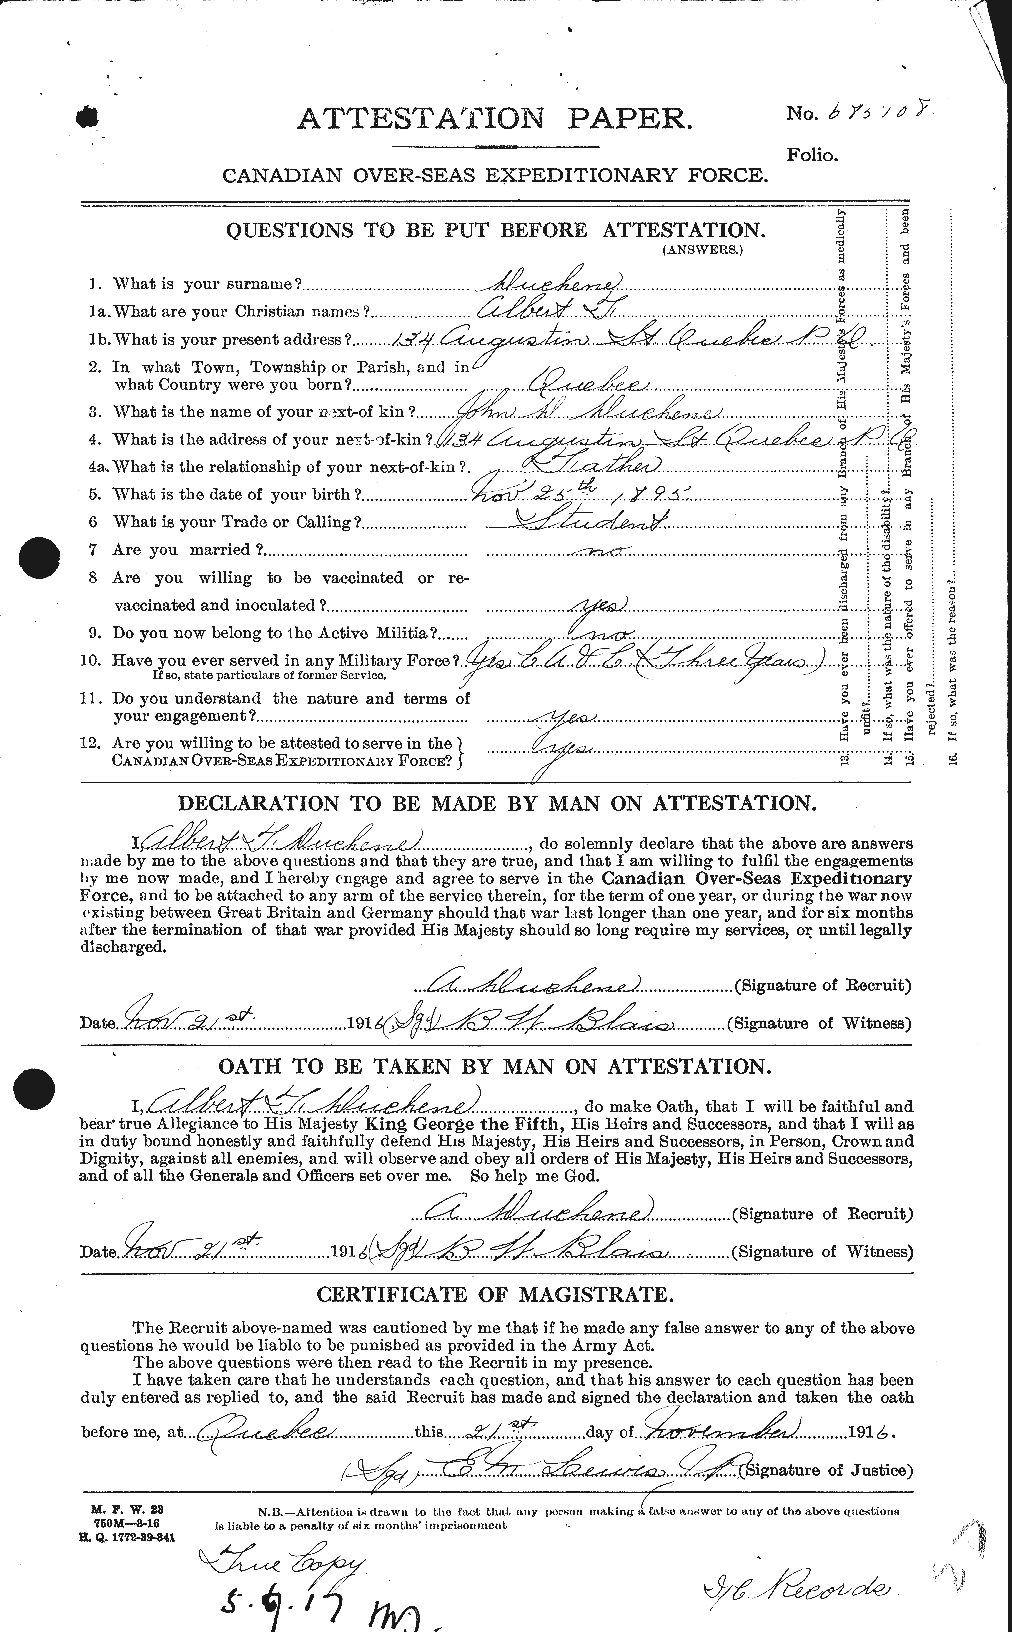 Personnel Records of the First World War - CEF 302358a